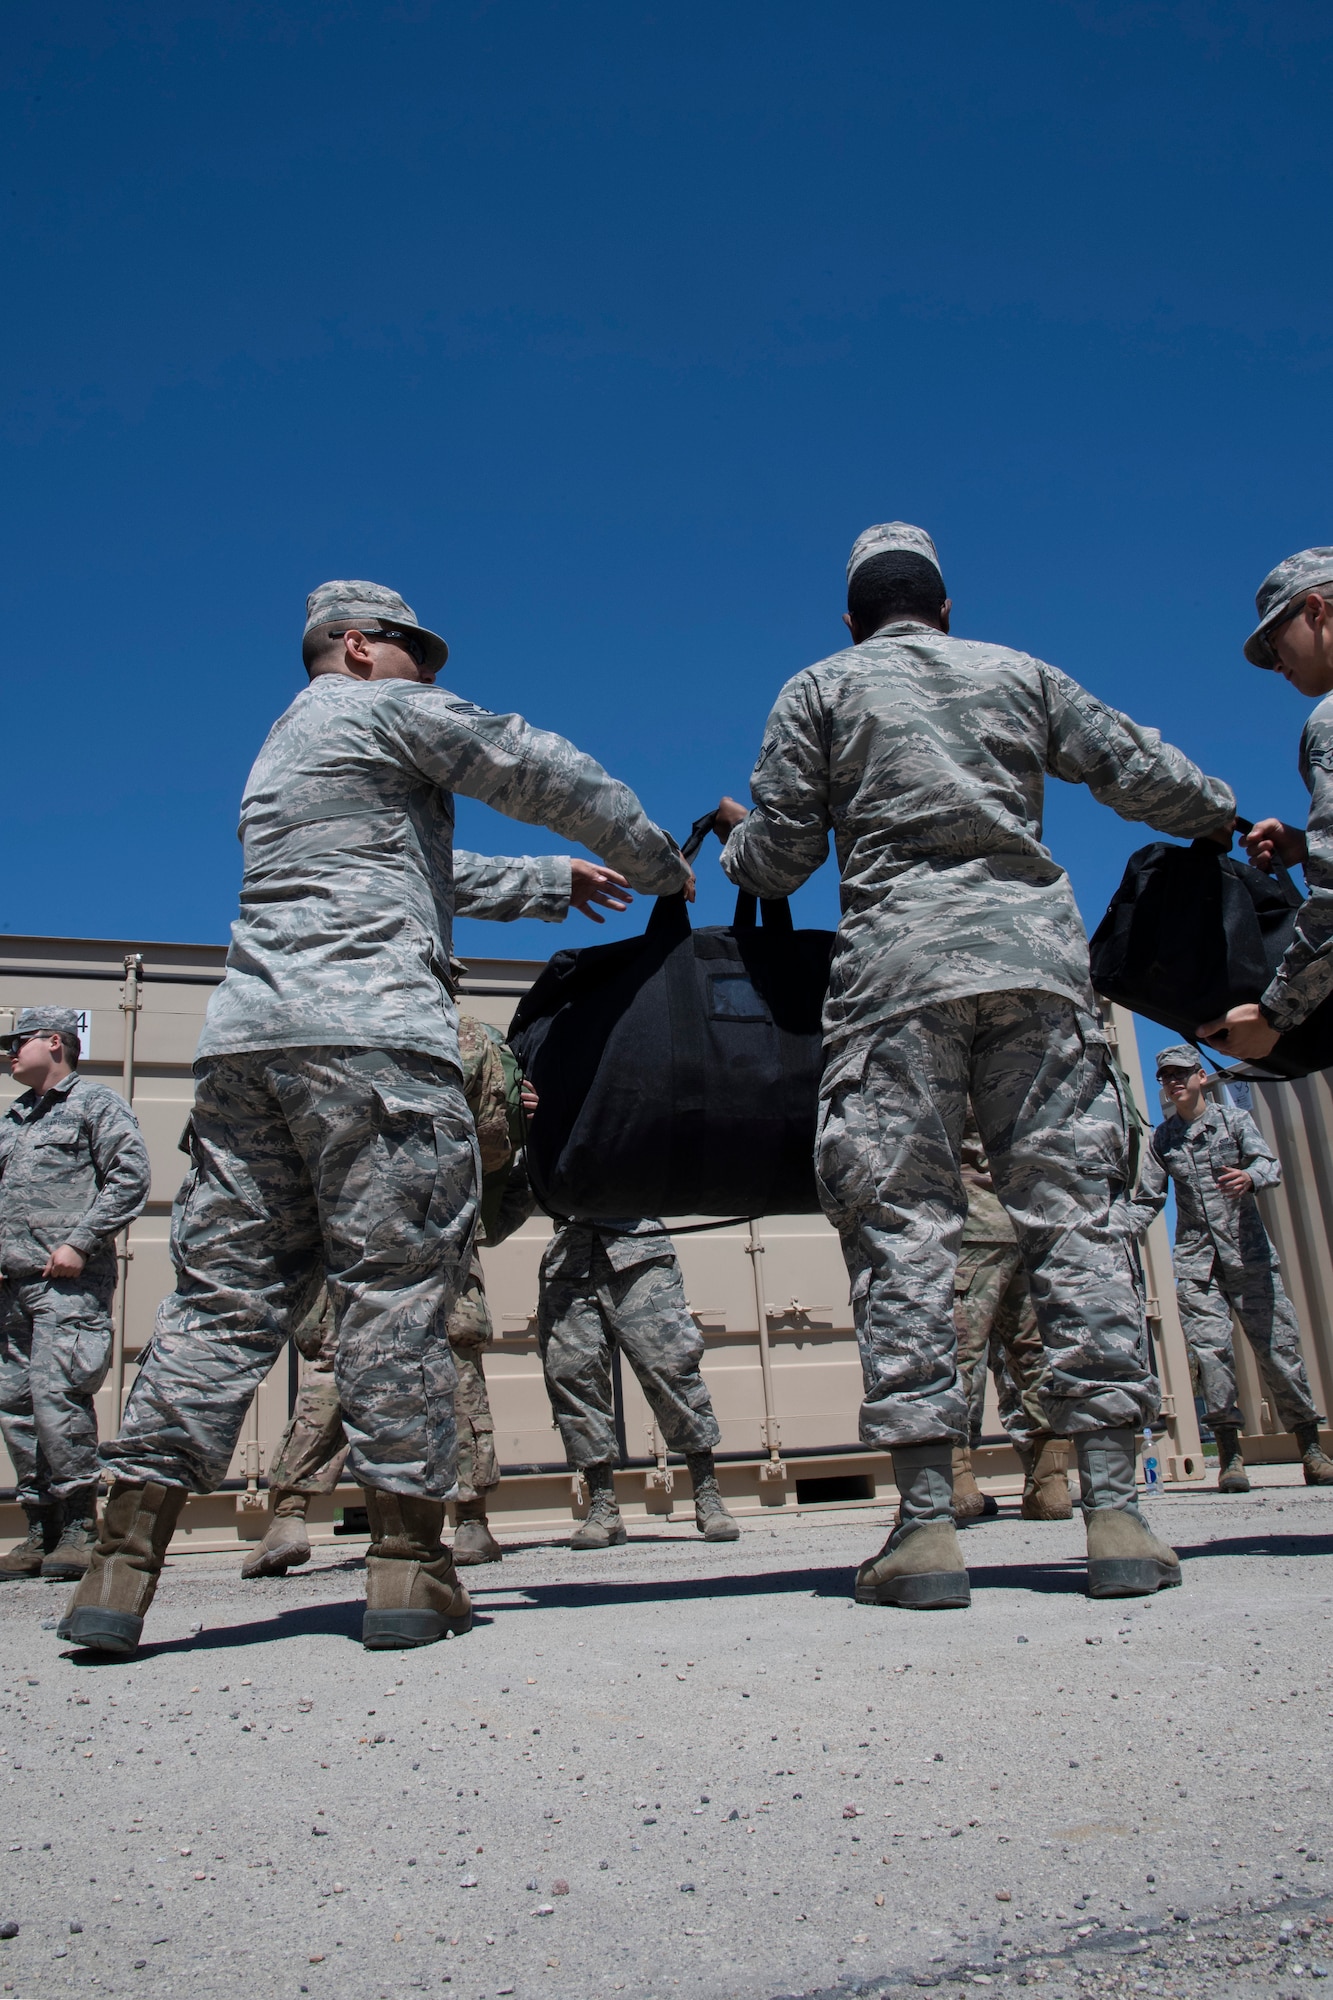 Grand Forks Air Force Base airmen work together to unload personal belongings and mission oriented protective posture gear May 20, 2019, to be used during exercise Summer Viking 19-01 on the National Air Guard Base in Fargo, North Dakota. Participants operated from a simulated contested base, in order to test capabilities and readiness in a deployed environment. (U.S. Air Force photo by Senior Airman Elora J. Martinez)